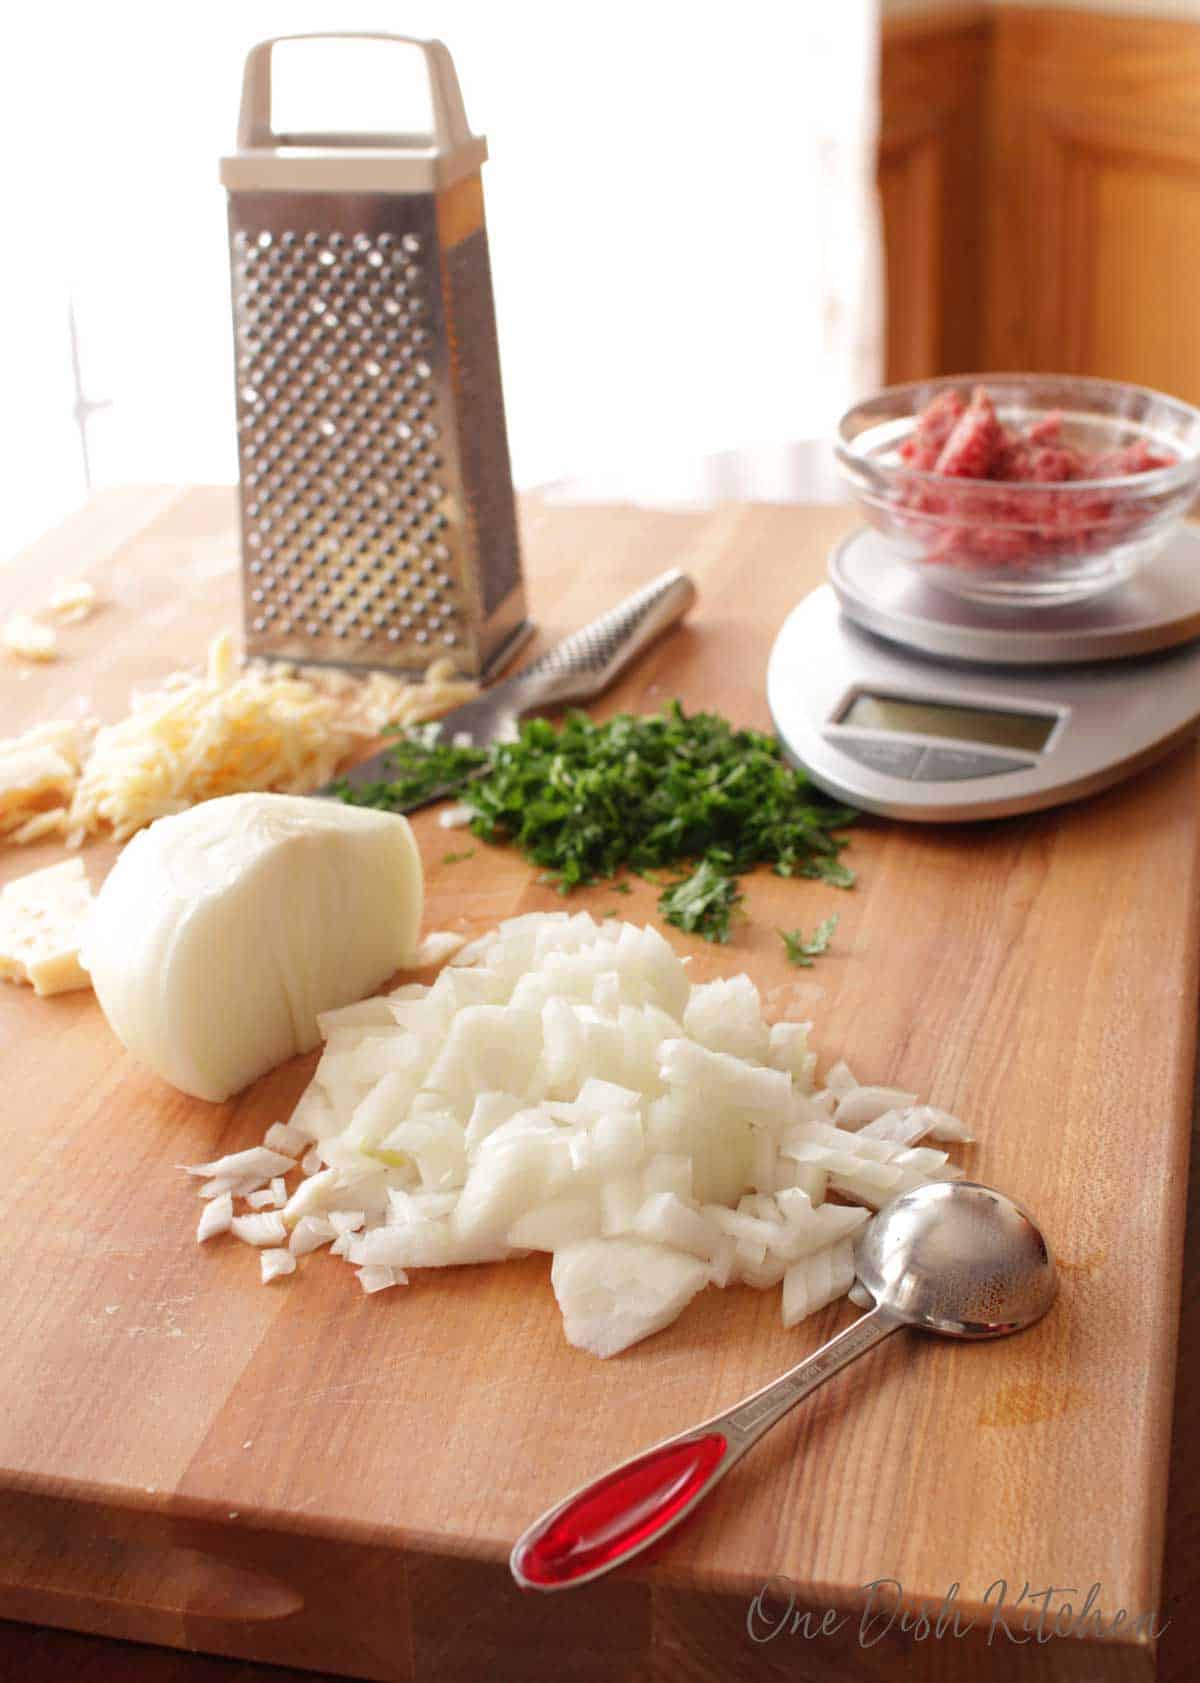 Ingredients for making a meatball on a wooden cutting board- chopped onions, chopped parsley, grated parmesan cheese, and ground beef on a scale.